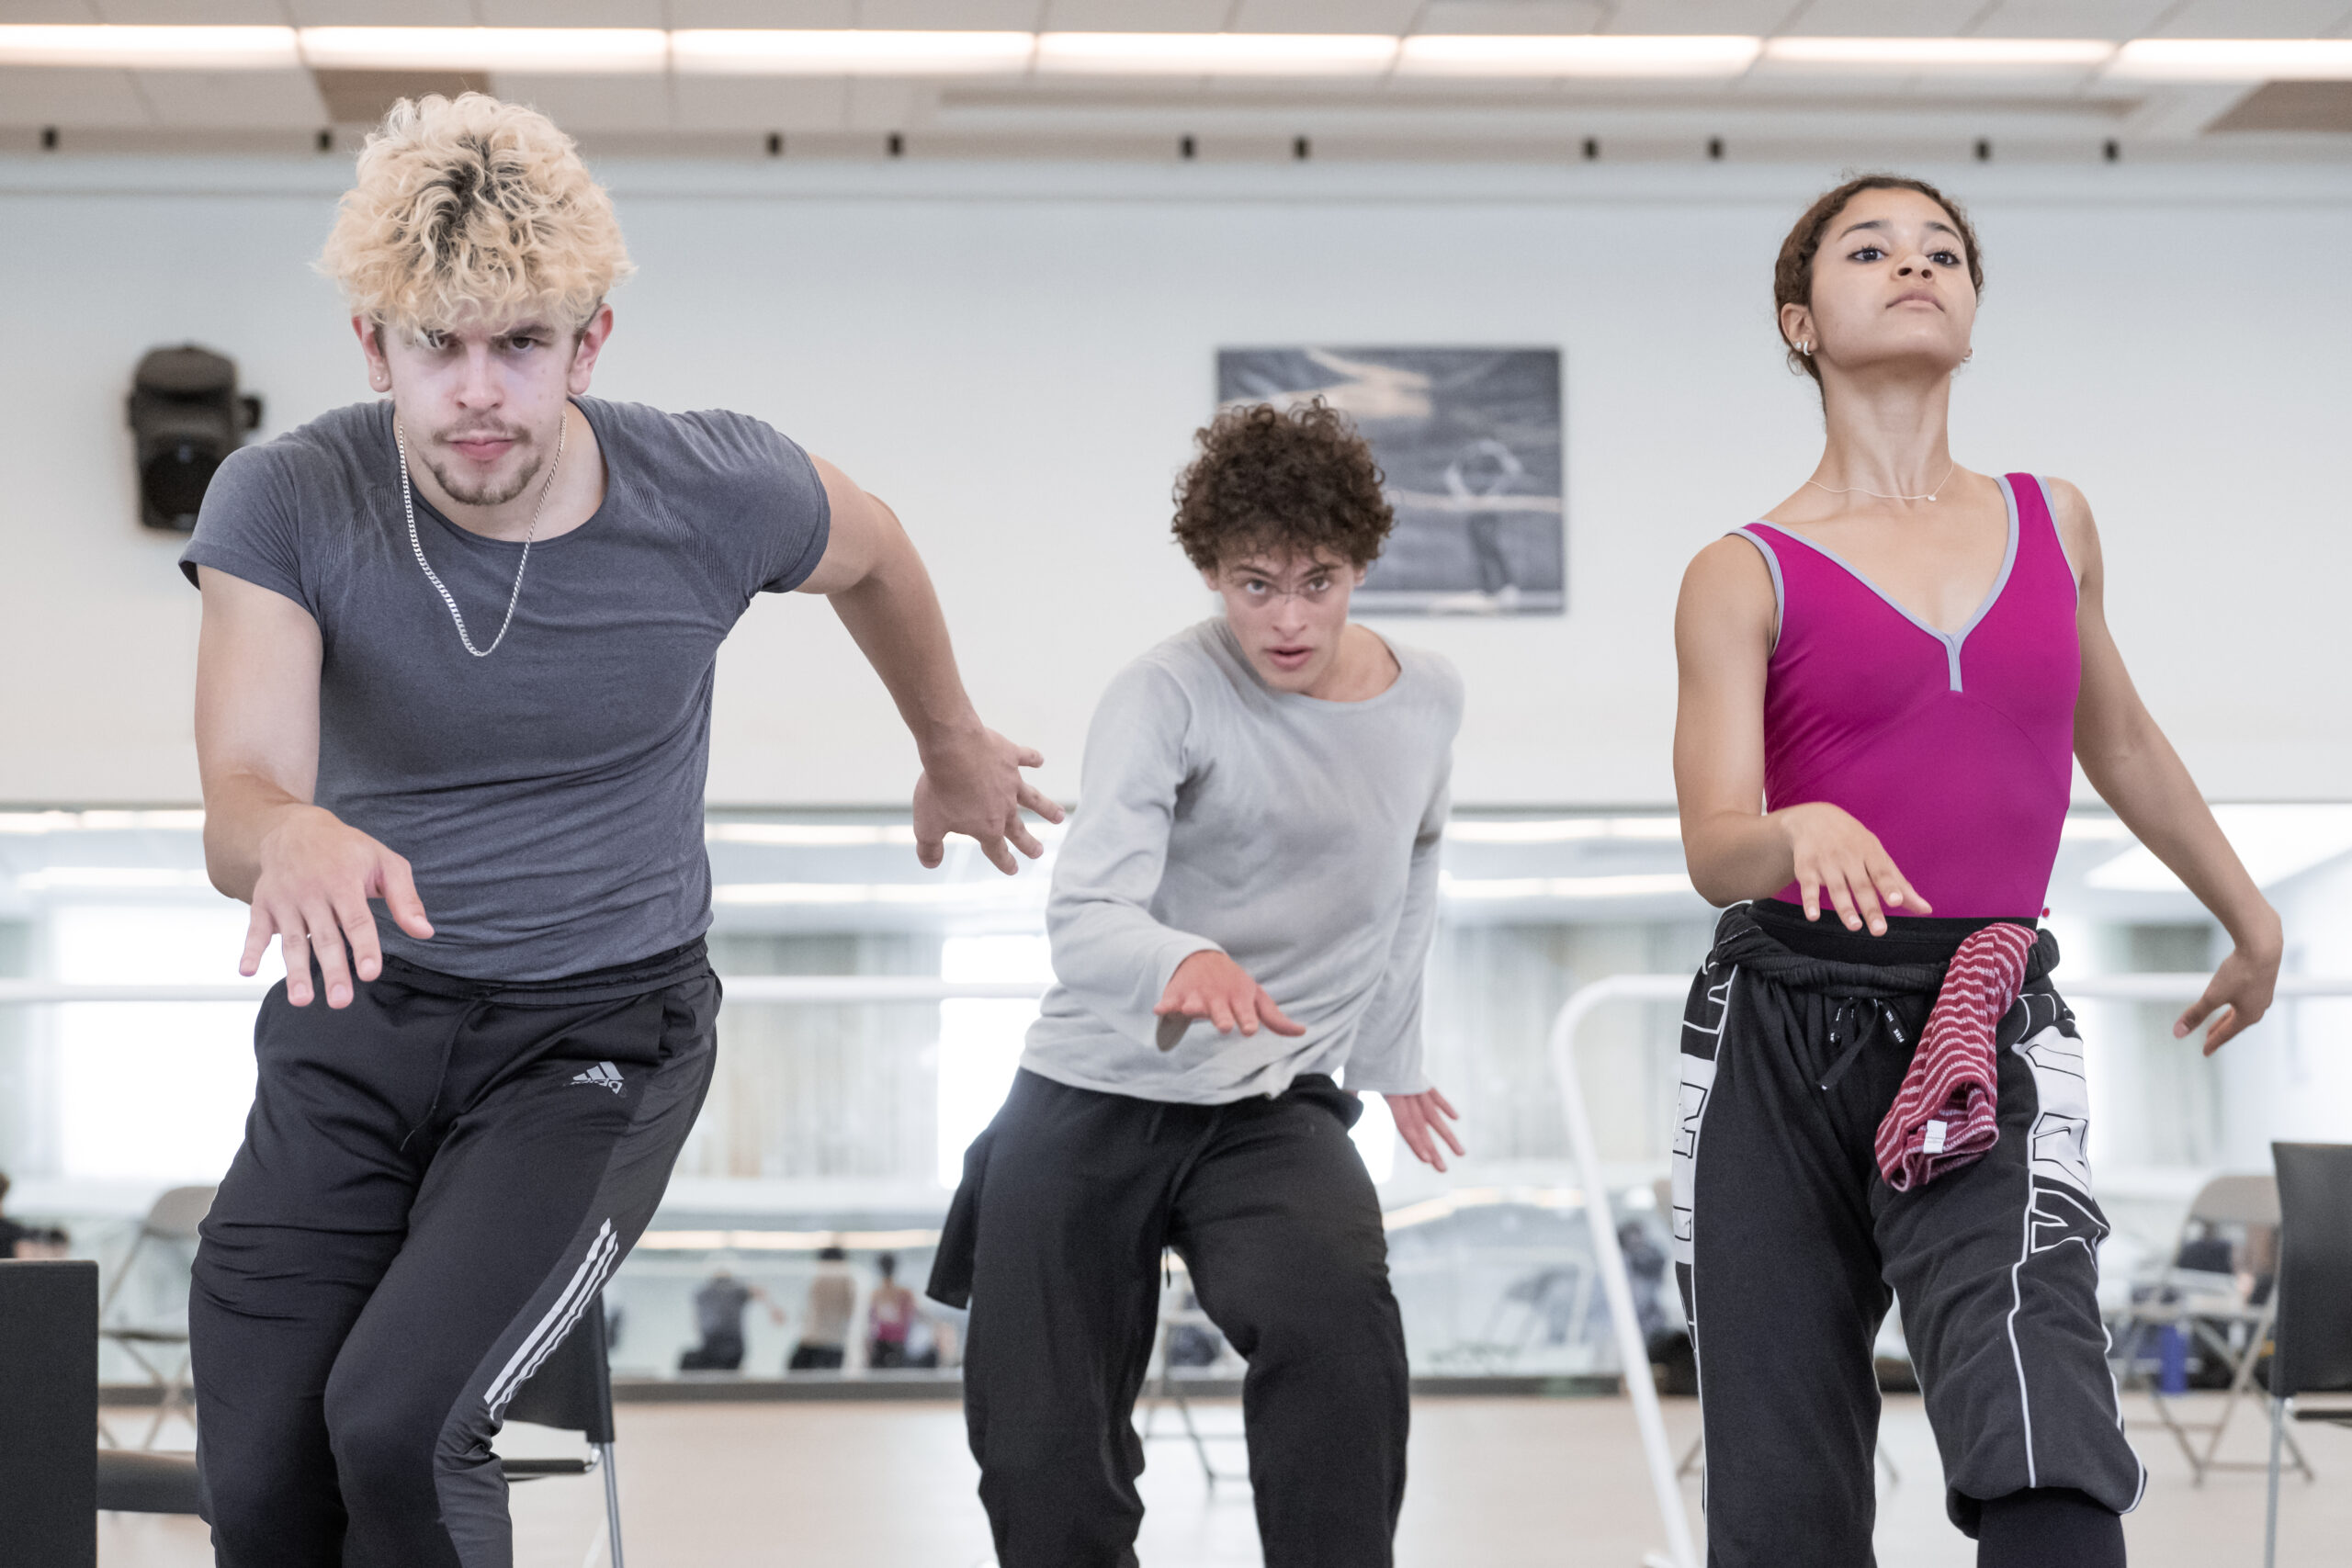 Three dancers in rehearsal-wear move through their hips in a way evocative of salsa dancing as they face forward.